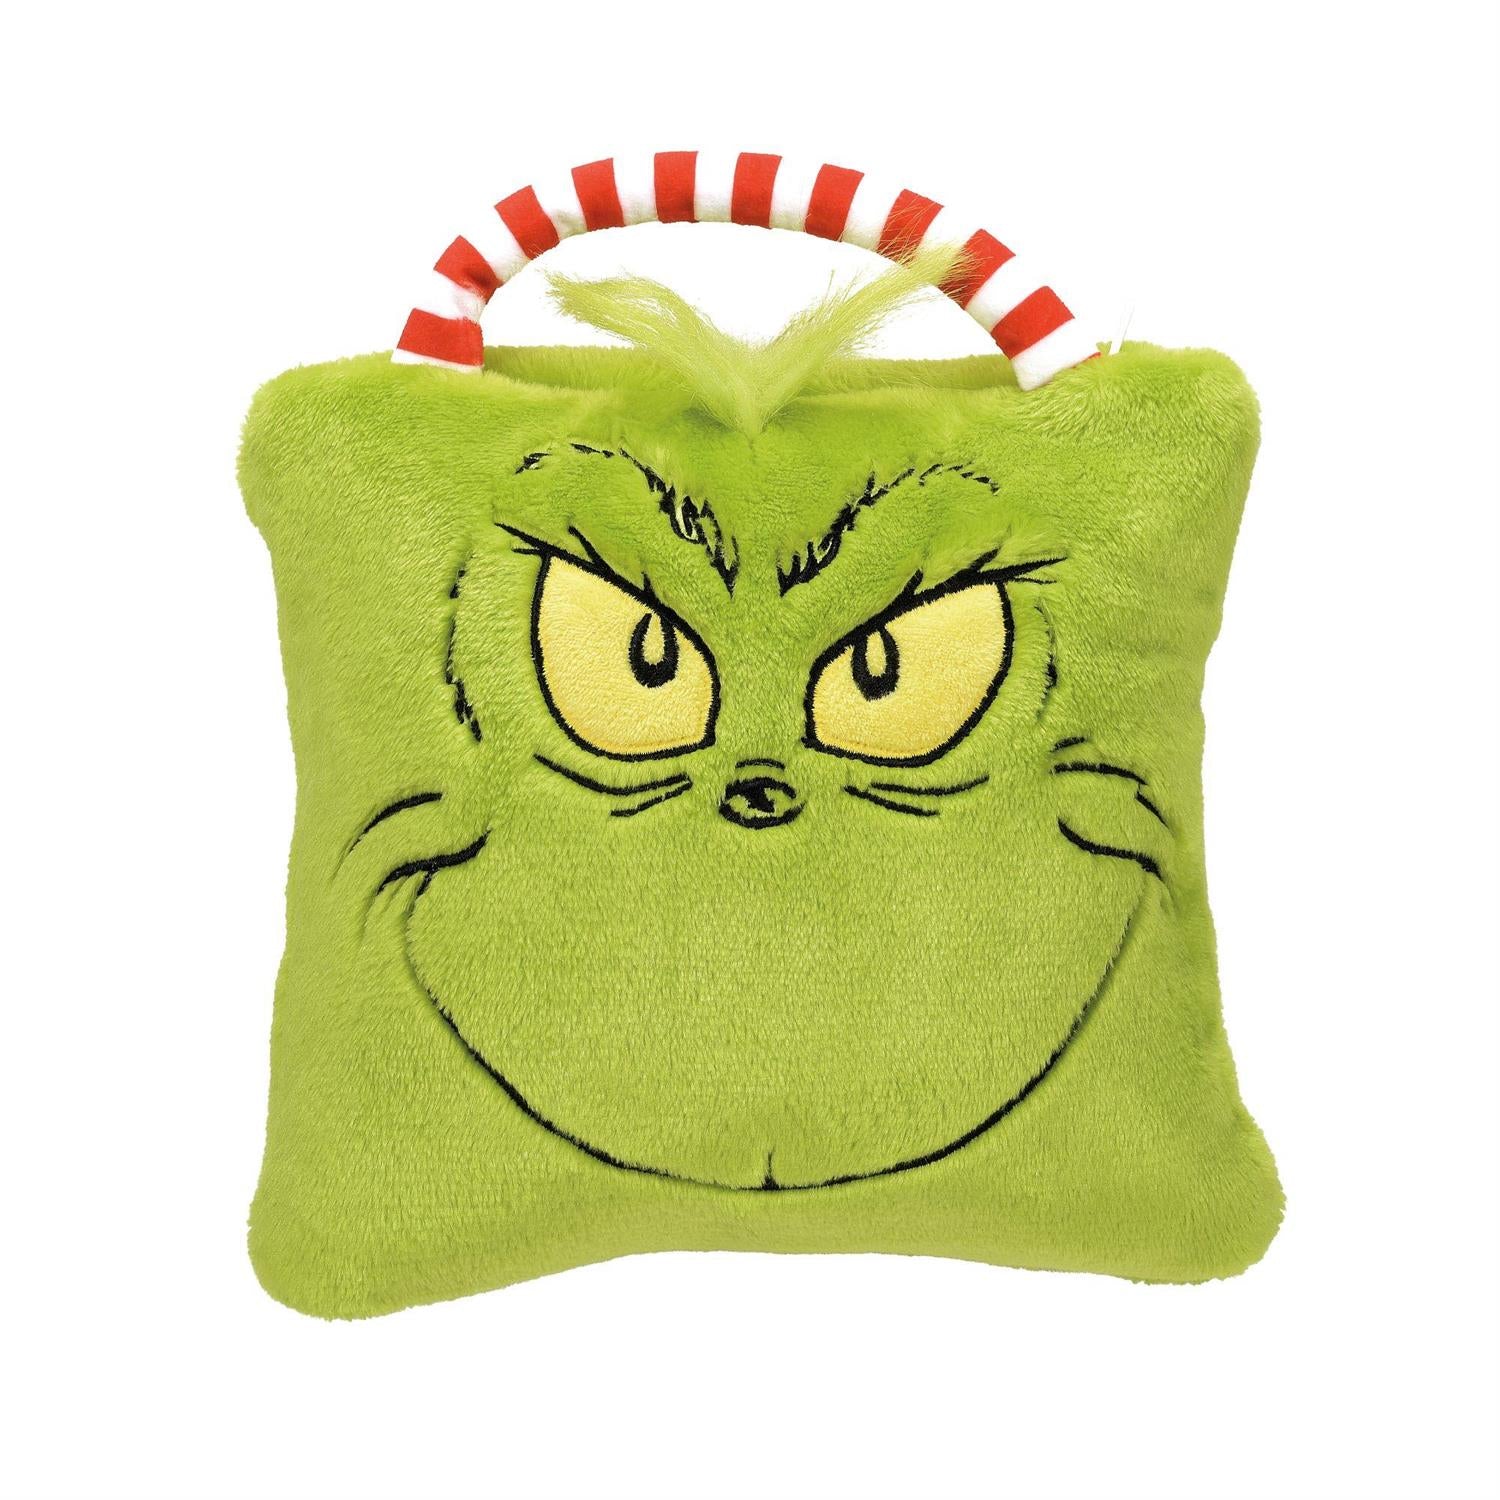 Grinch travel baby blanket in ultra soft polyester fabrics. Embroidered smiling grinch face on green ultra-soft materials. 7.5" square baby travel blanket.